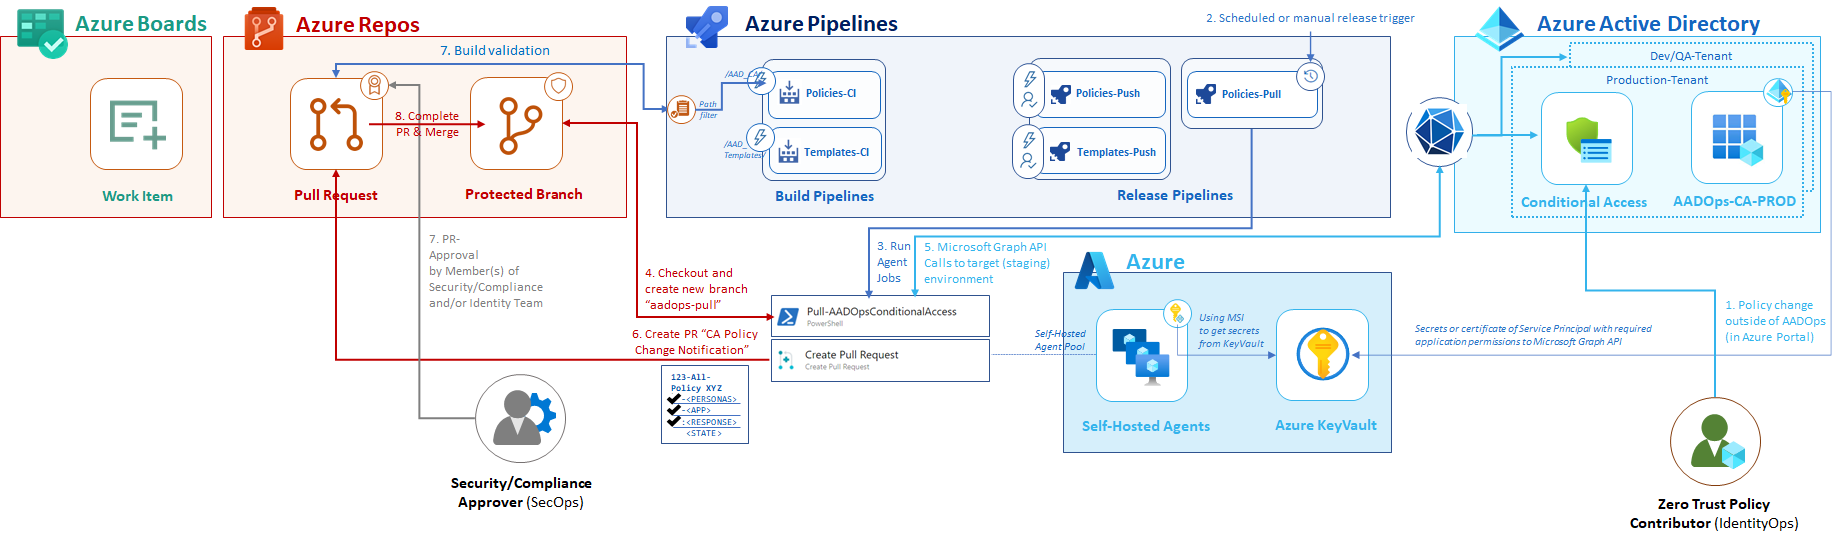 ../2021-08-11-aadops-conditional-access/aadops30.png